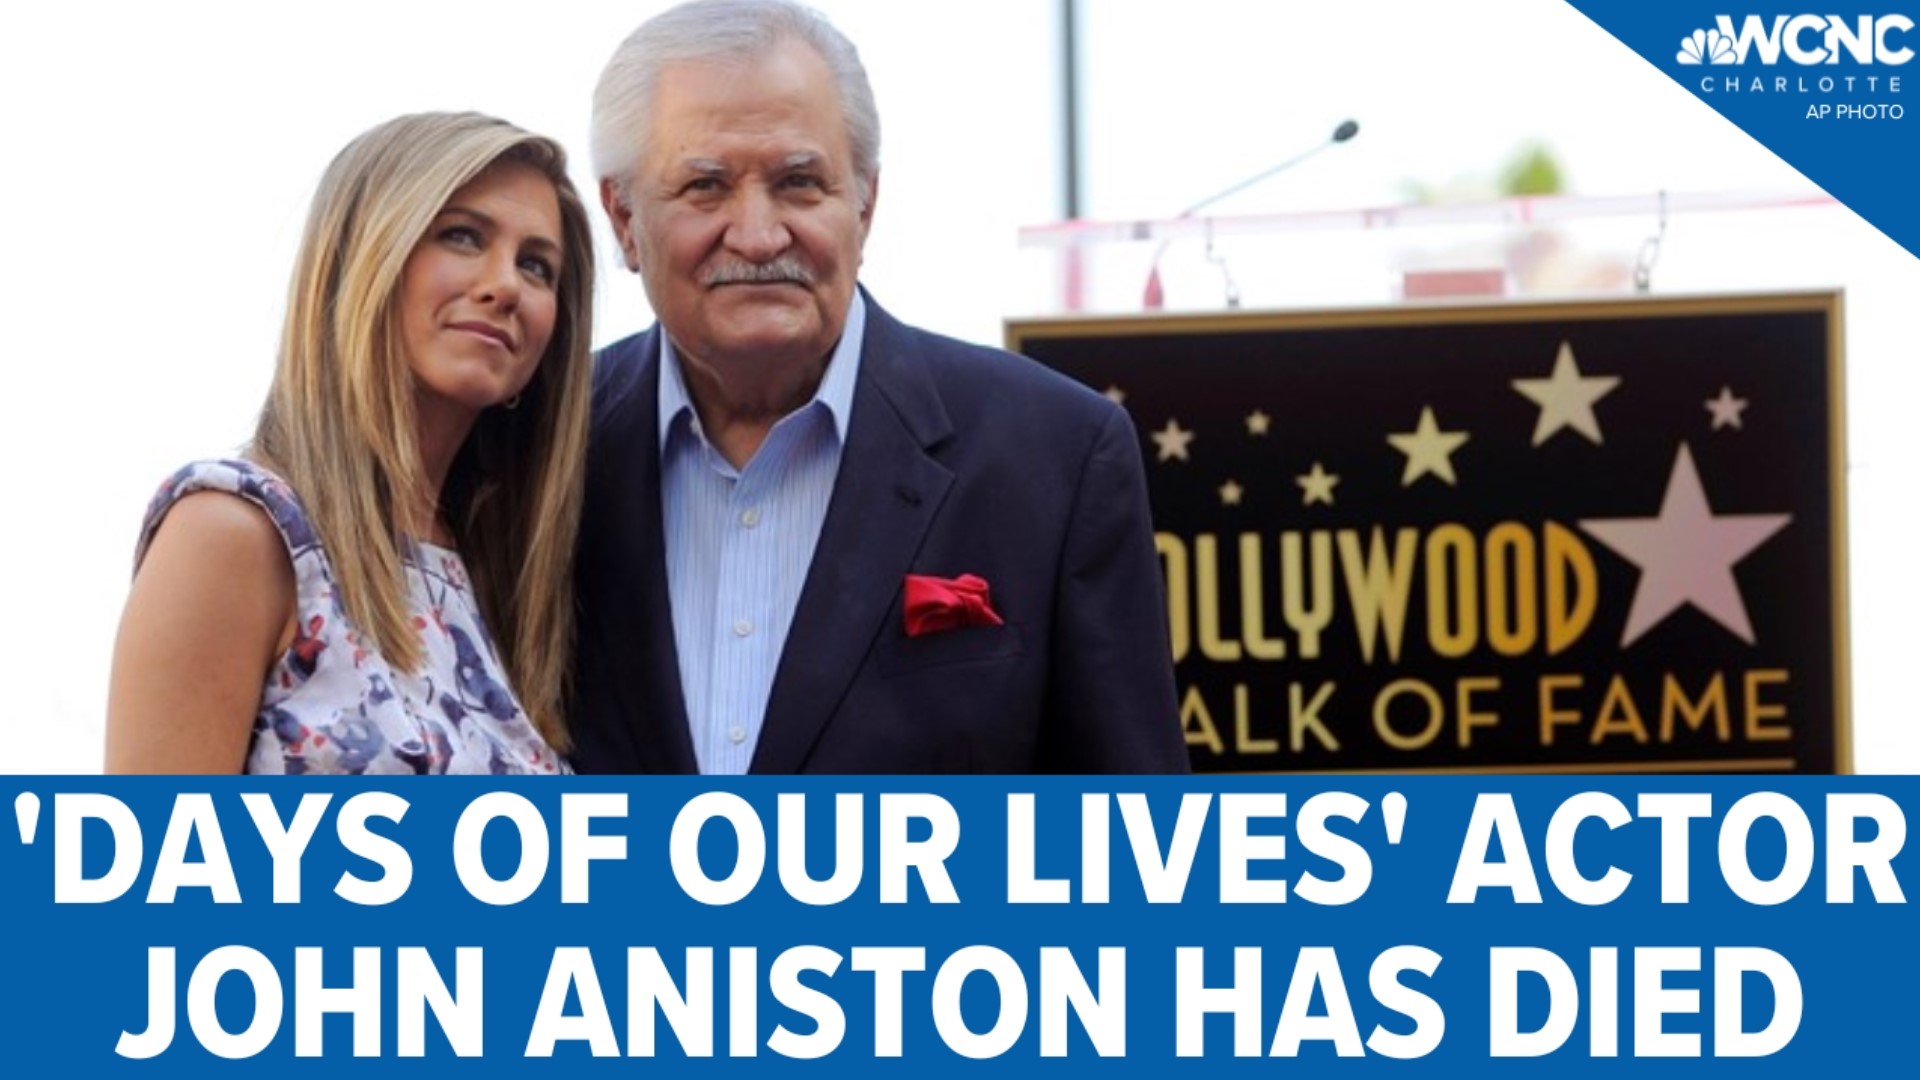 John Aniston was honored earlier this year with a Daytime Emmy Lifetime Achievement Award, presented with a sweet message from his daughter.